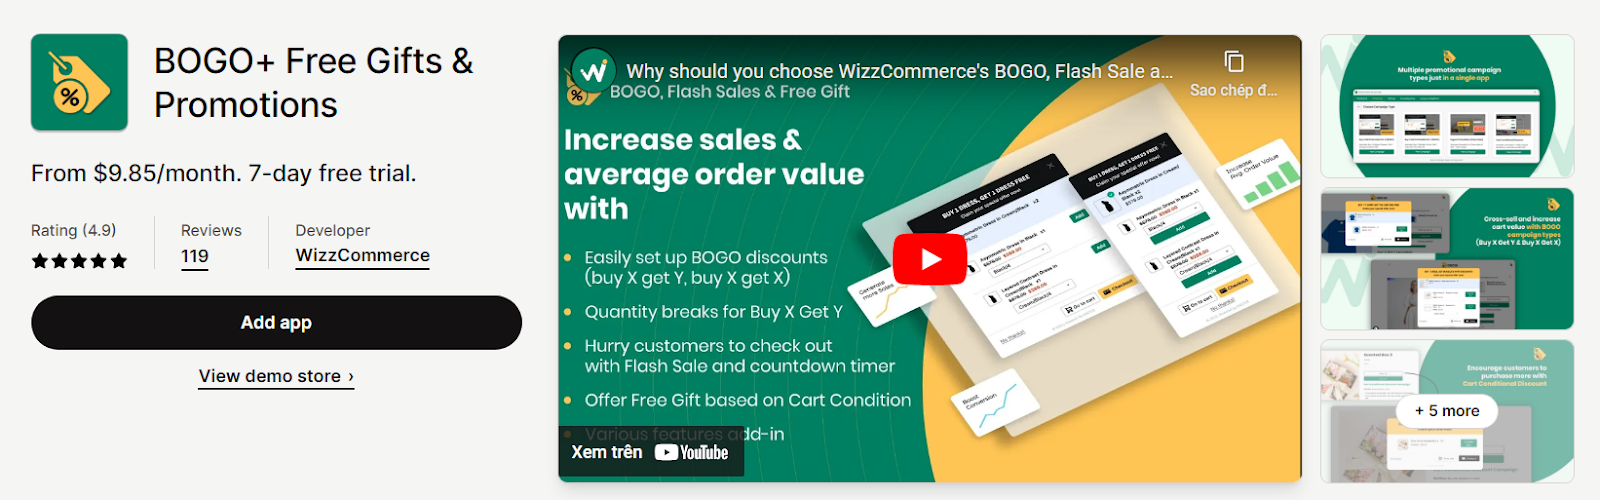 BOGO+ Free Gifts & Promotions - Shopify bulk discount app: BOGO+ logo with volume discount options and gift promotions.